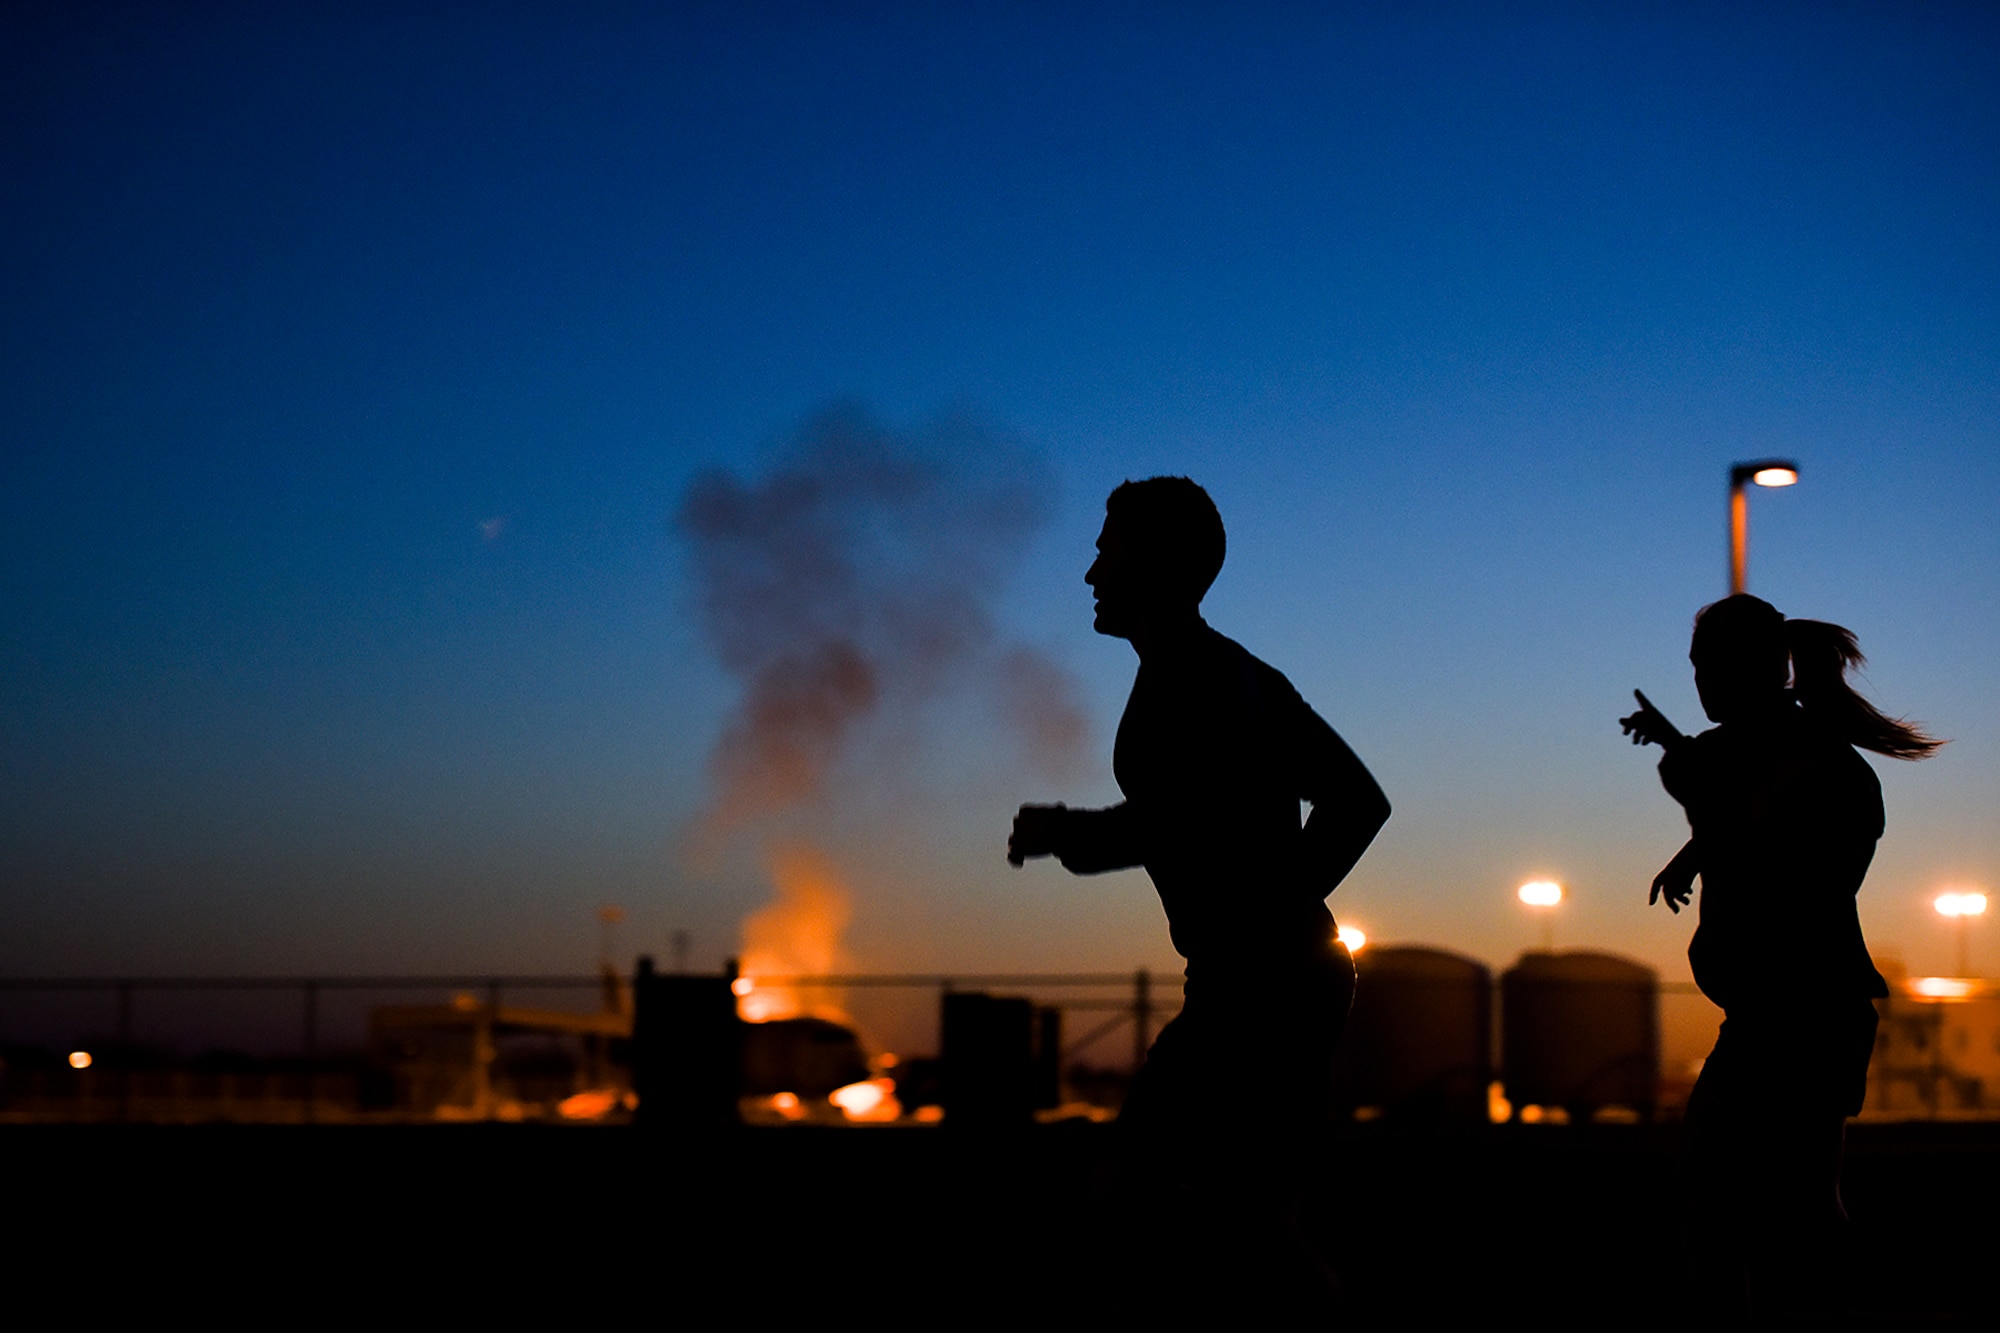 Rob Harris, KIDY Fox reporter, runs past the Louis F. Garland Department of Defense Fire Academy during a physical training session with the 17th Training Wing on Goodfellow Air Force Base, Texas, March 25, 2016. Harris participated in the exercise as part of a news series covering local fitness practices. (U.S. Air Force photo by Senior Airman Devin Boyer/Released)